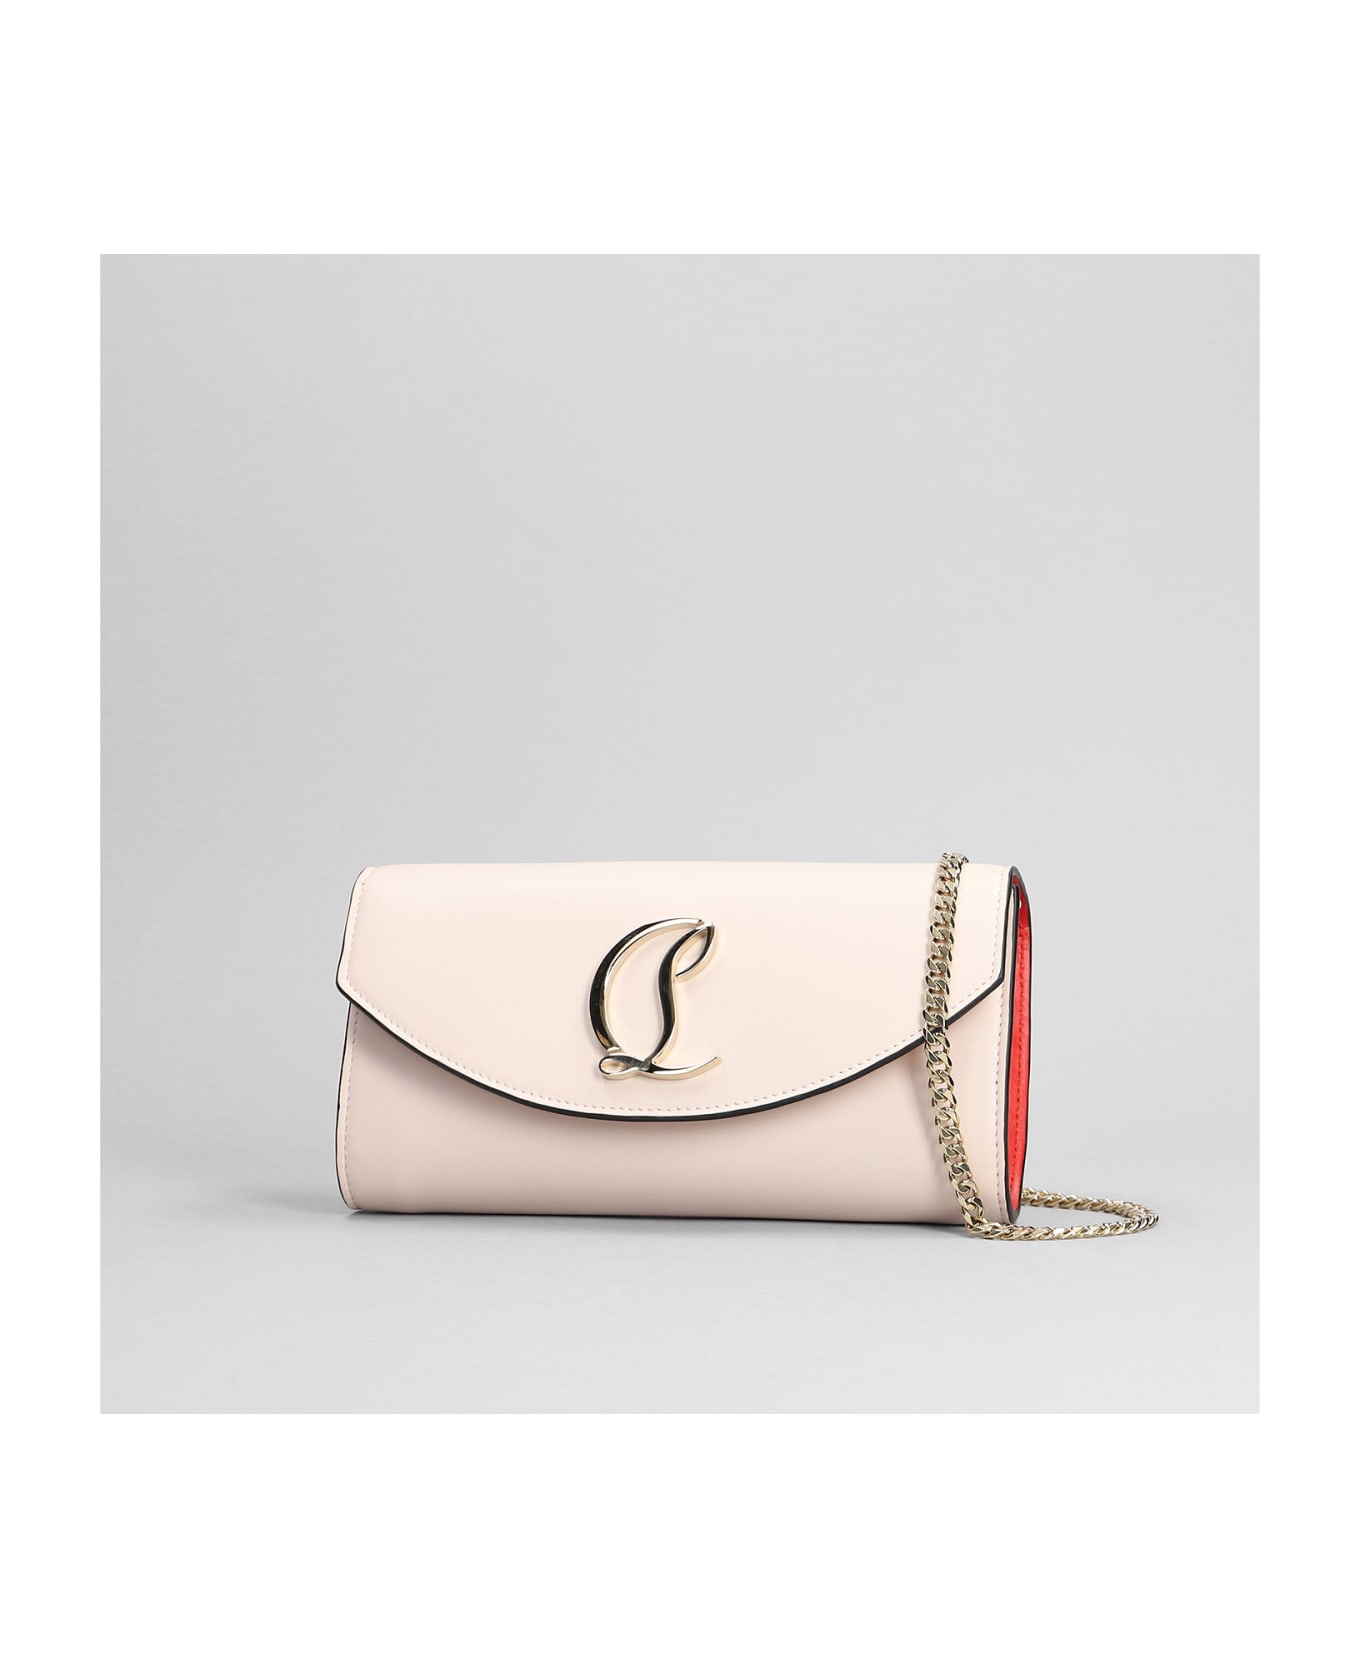 Christian Louboutin Wallet On Chain In Calf Leather - LECHE GOLD 財布